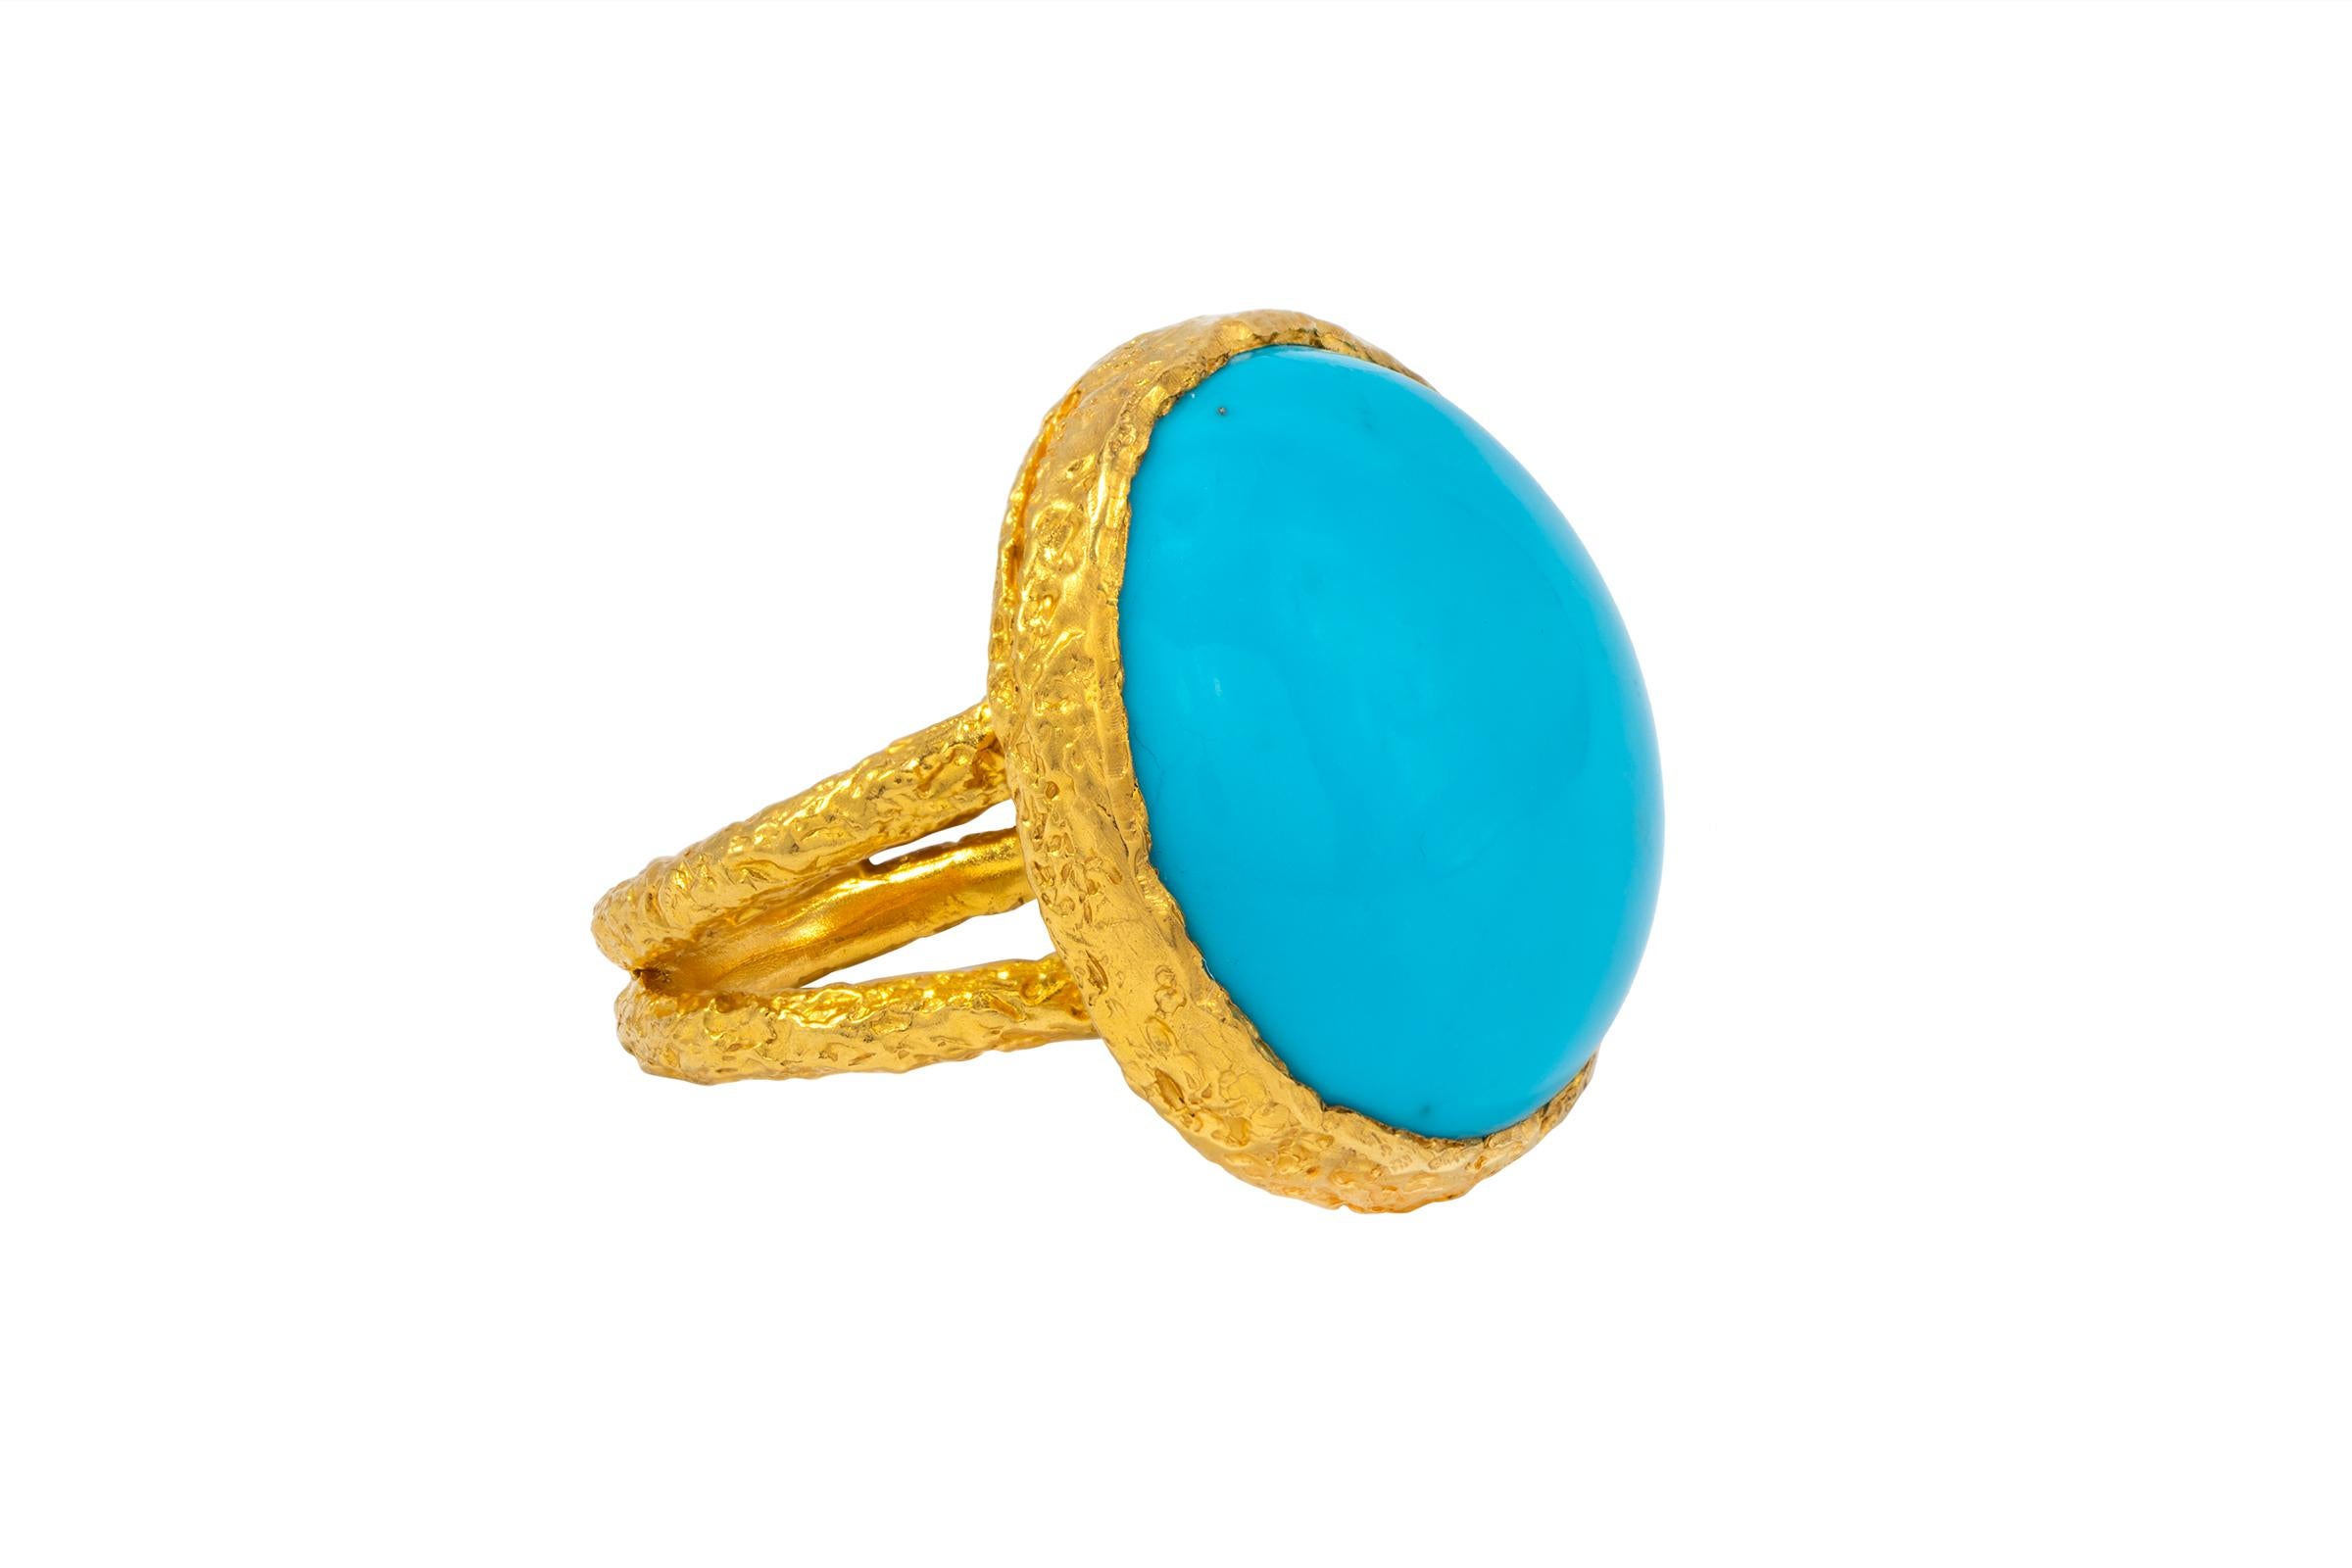 Artisan 22k Gold Summer Signature Turquoise Cocktail Ring by Tagili For Sale